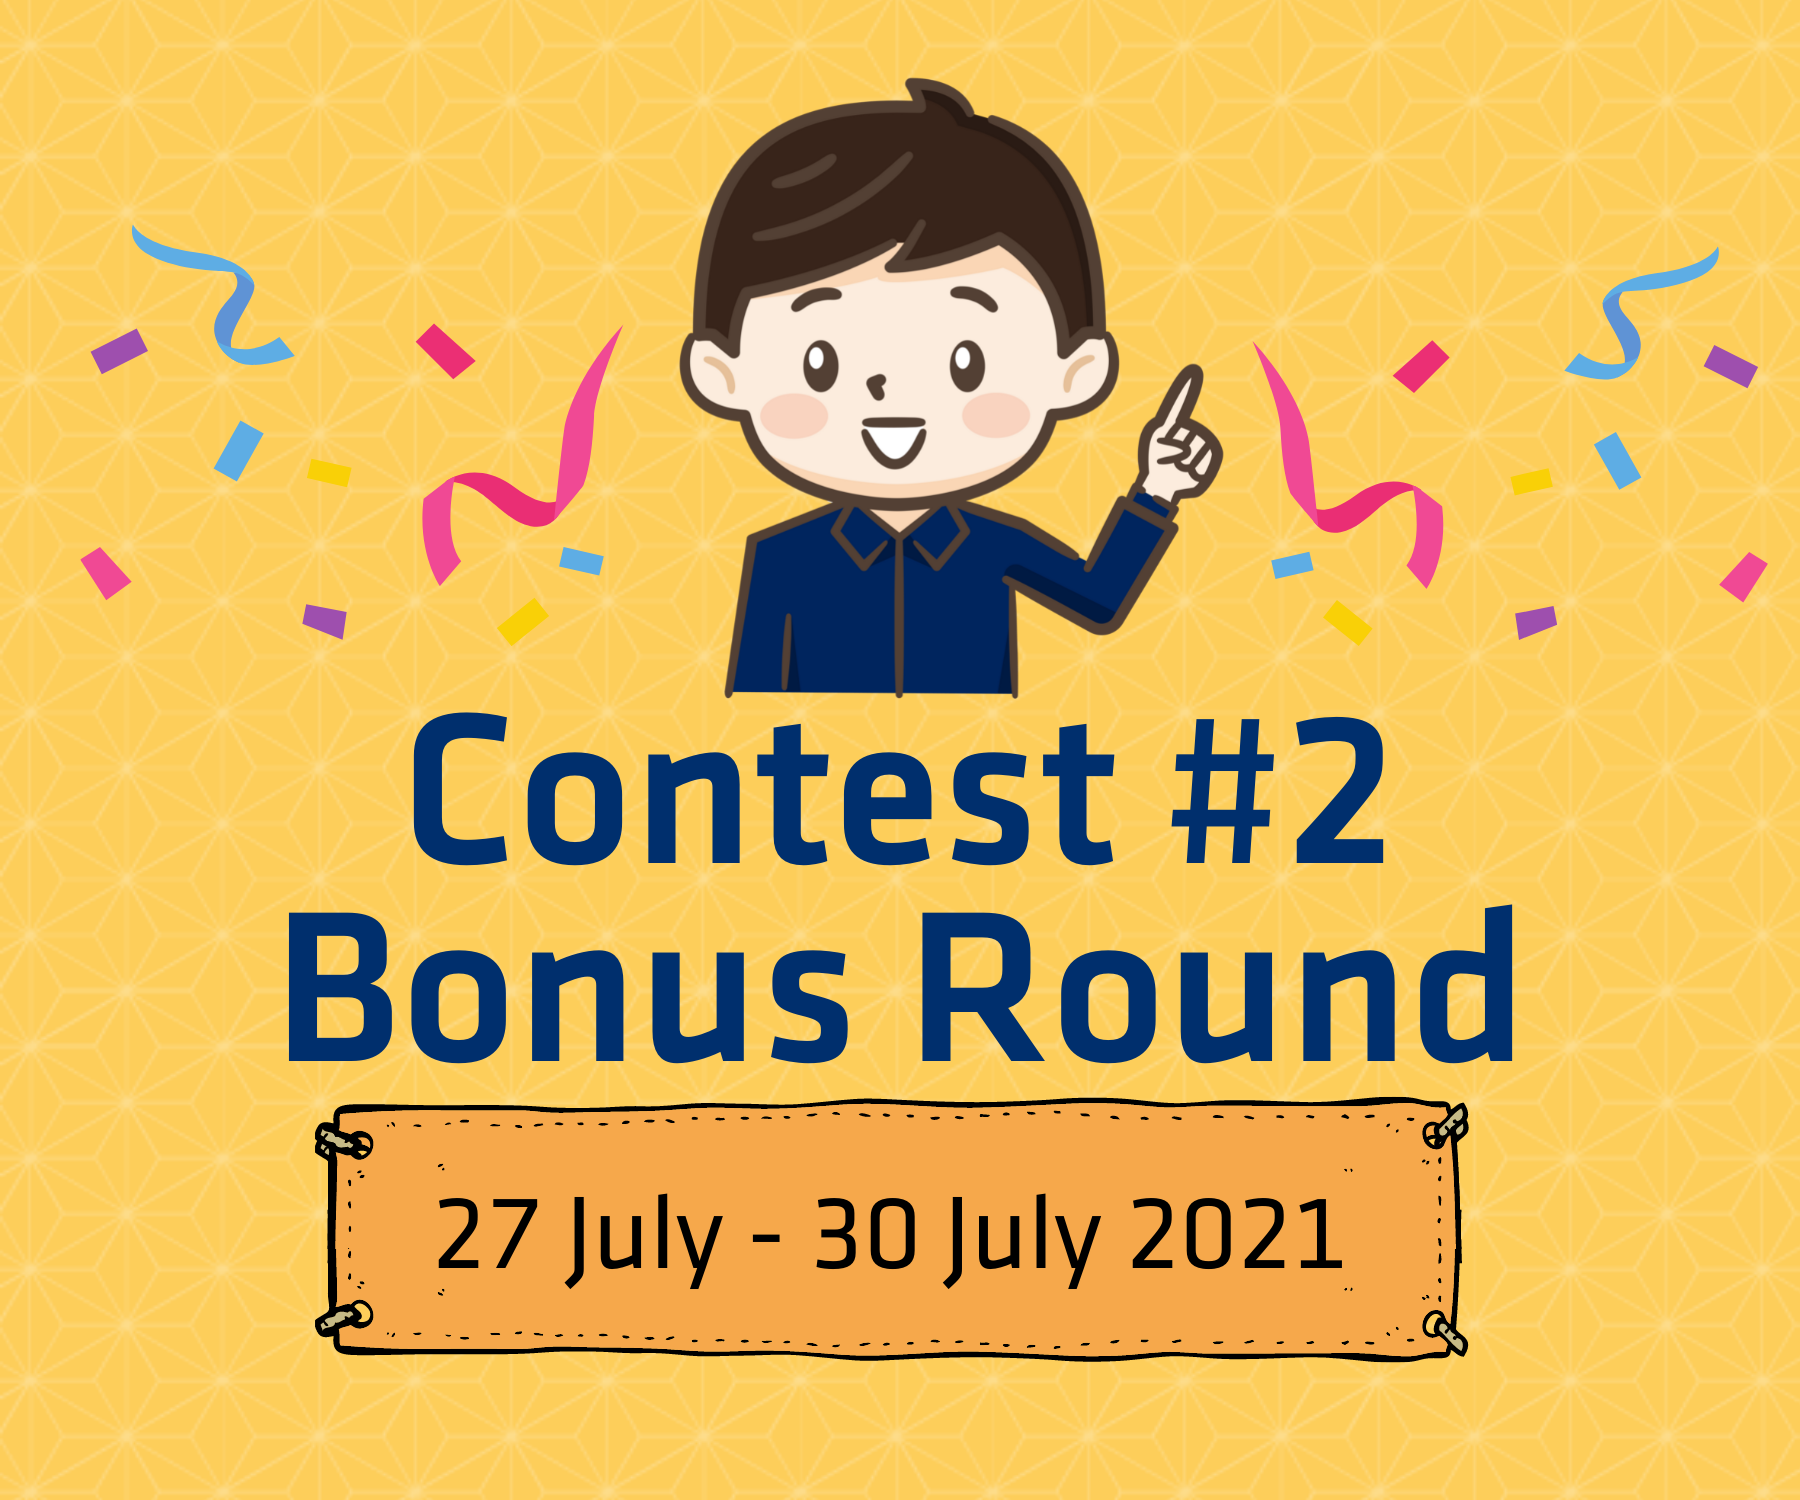 Contest #2 Bonus Round - Stand a chance to DOUBLE your winnings!